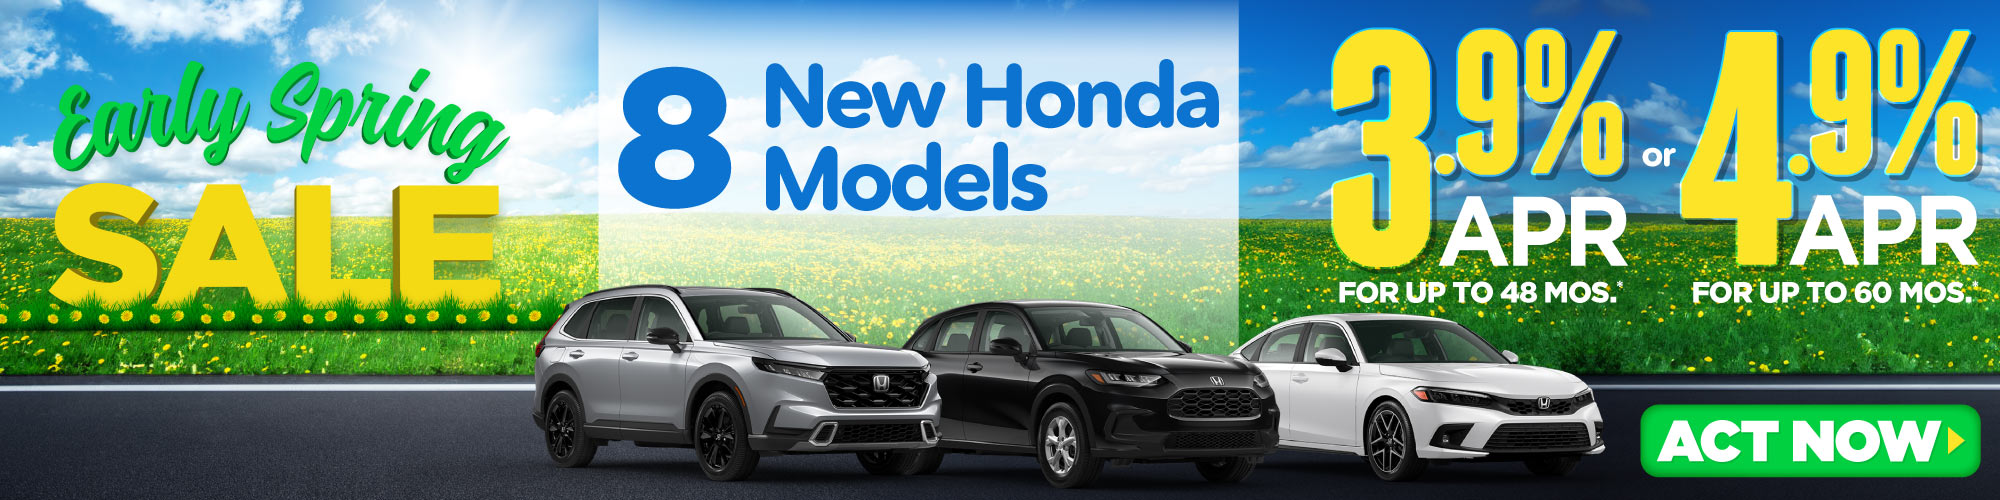 New 2022 Honda Pilot or Passport or Ridgeline | As Low as 1.9% APR Available | Act Now